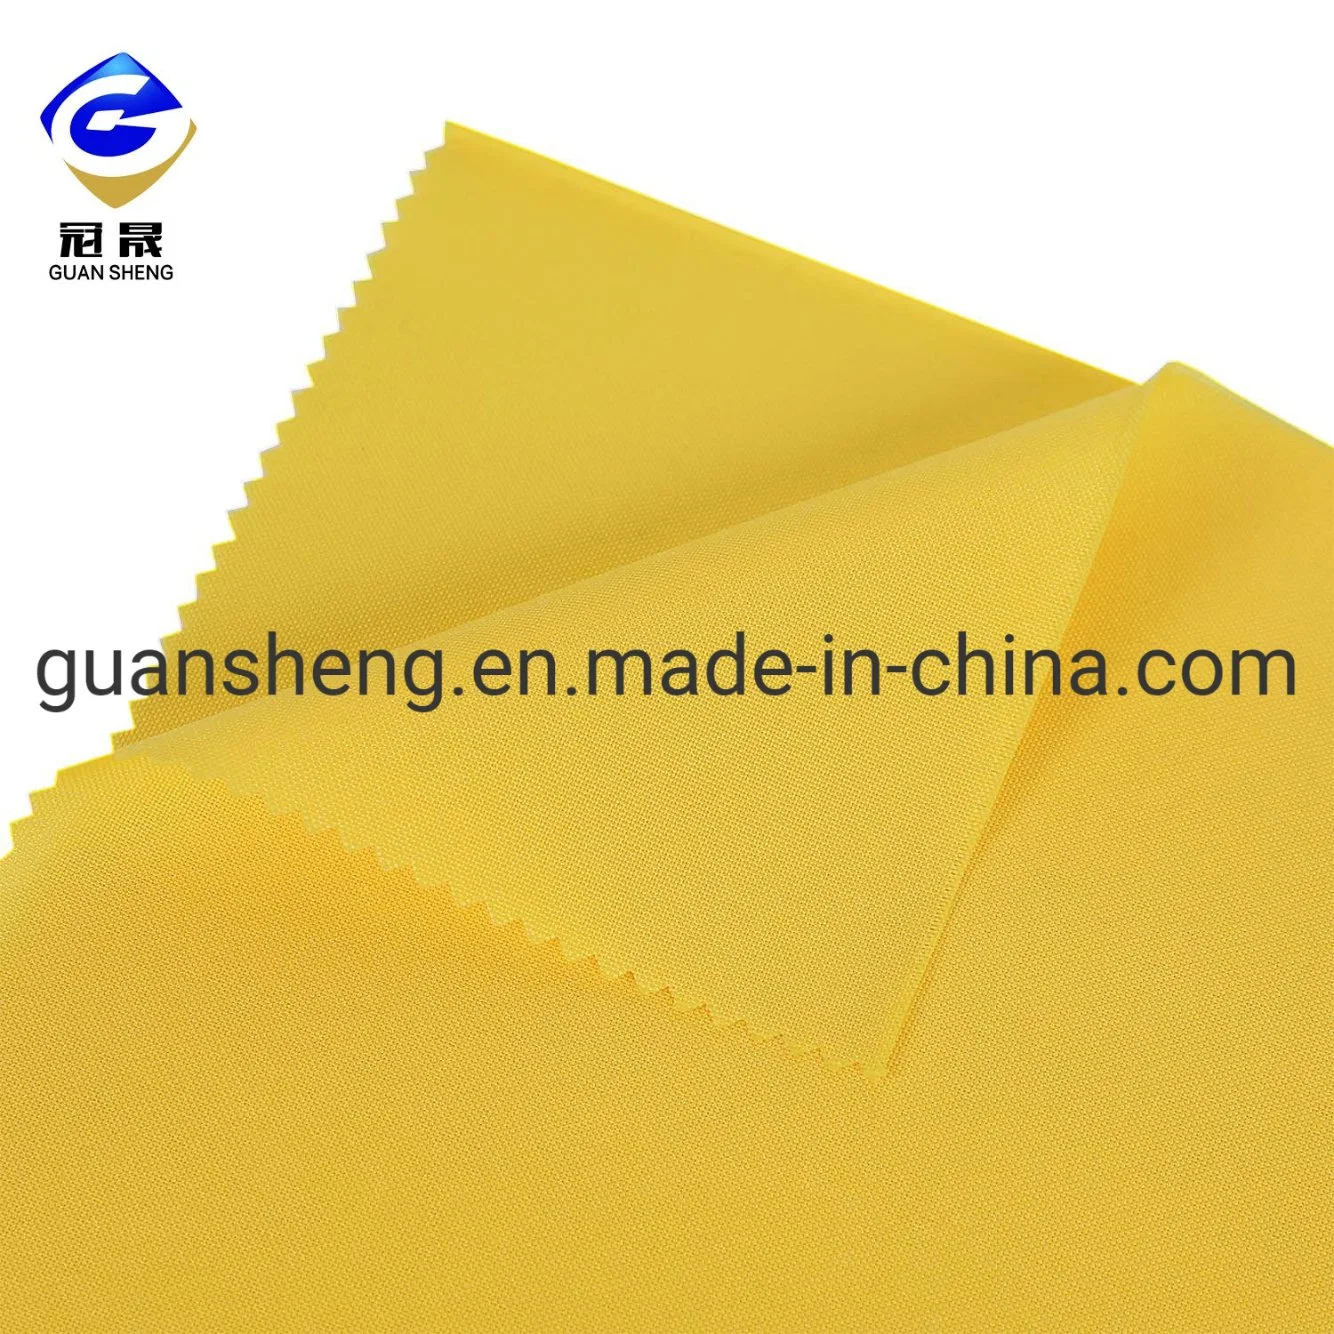 Original Factory 100%Polyester Gum Stay Non Woven Fusible Interlining Adhesive Fabric One Side Cut Away Non Woven Interlining Fabric for Garment